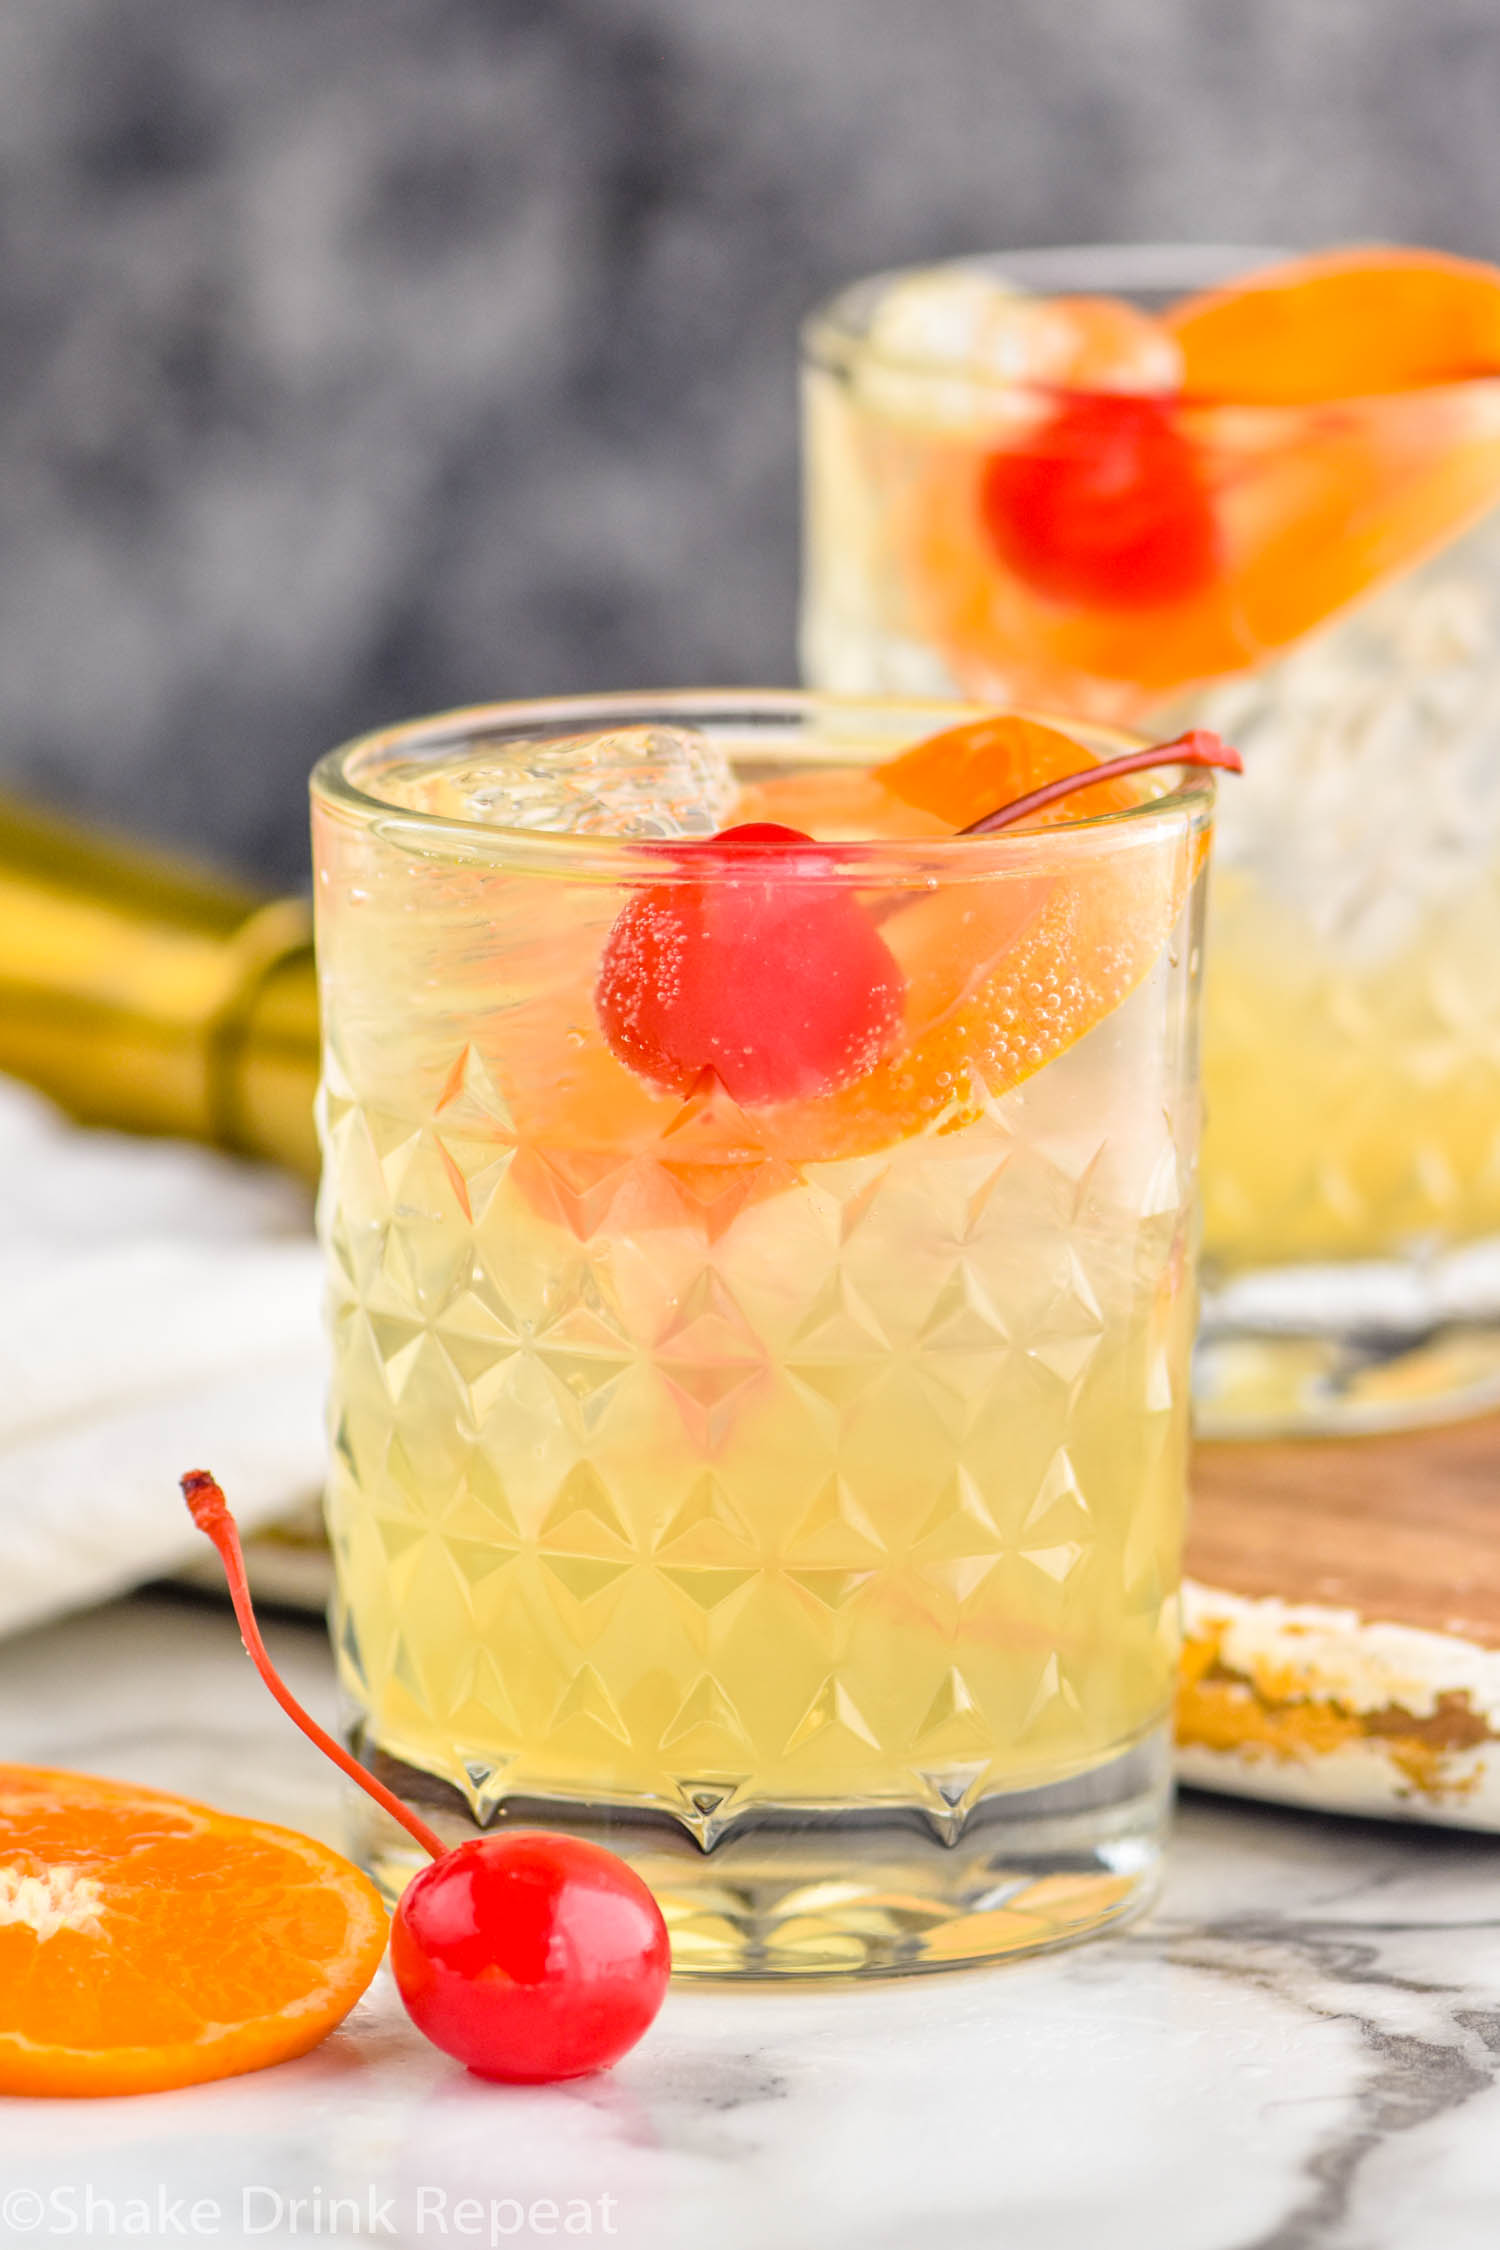 two glasses of Amaretto Sour with ice, orange slices, and cherry garnish